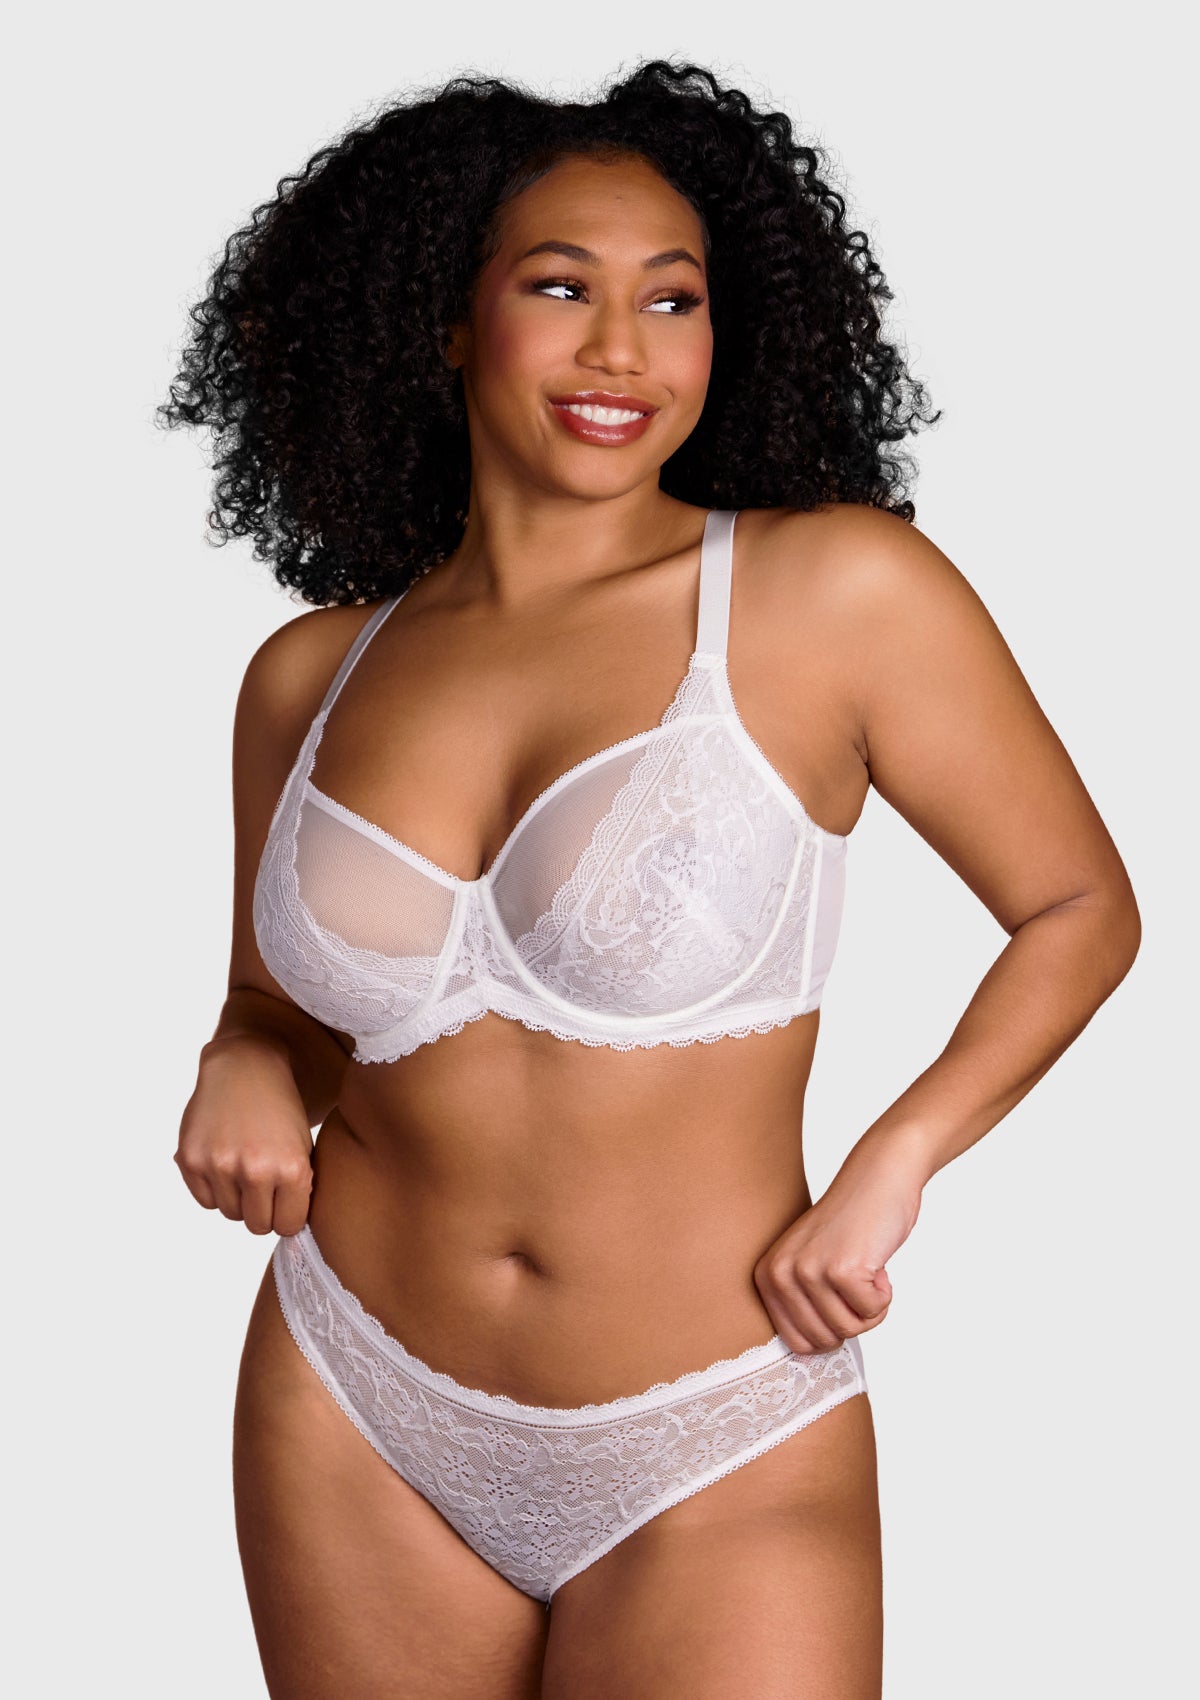 HSIA Anemone Big Bra: Best Bra For Lift And Support, Floral Bra - White / 34 / DDD/F